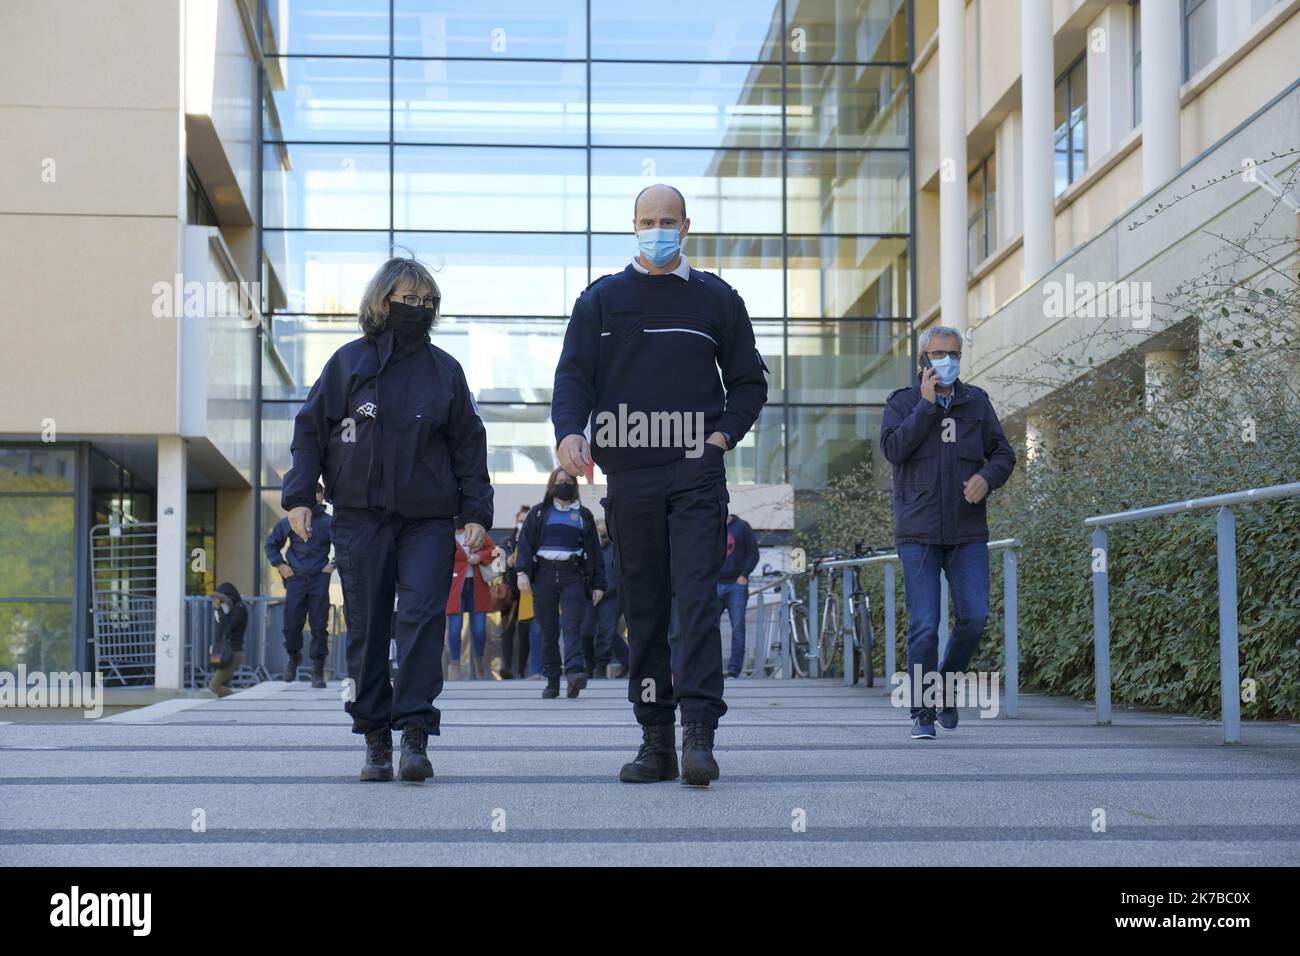 ©Giacomo Italiano/MAXPPP - Gathering of police officers, with the union Unite SGP Police FO, in front of the central police station of Montpellier following the aggression of police officers in the Paris region. France, Montpellier, October 12, 2020. Rassemblement de policiers, avec le syndicat Unite SGP Police FO, devant le commissariat central de Montpellier suite a l agression de policiers en région parisienne. France, Montpellier, 12 Octobre 2020.  Stock Photo